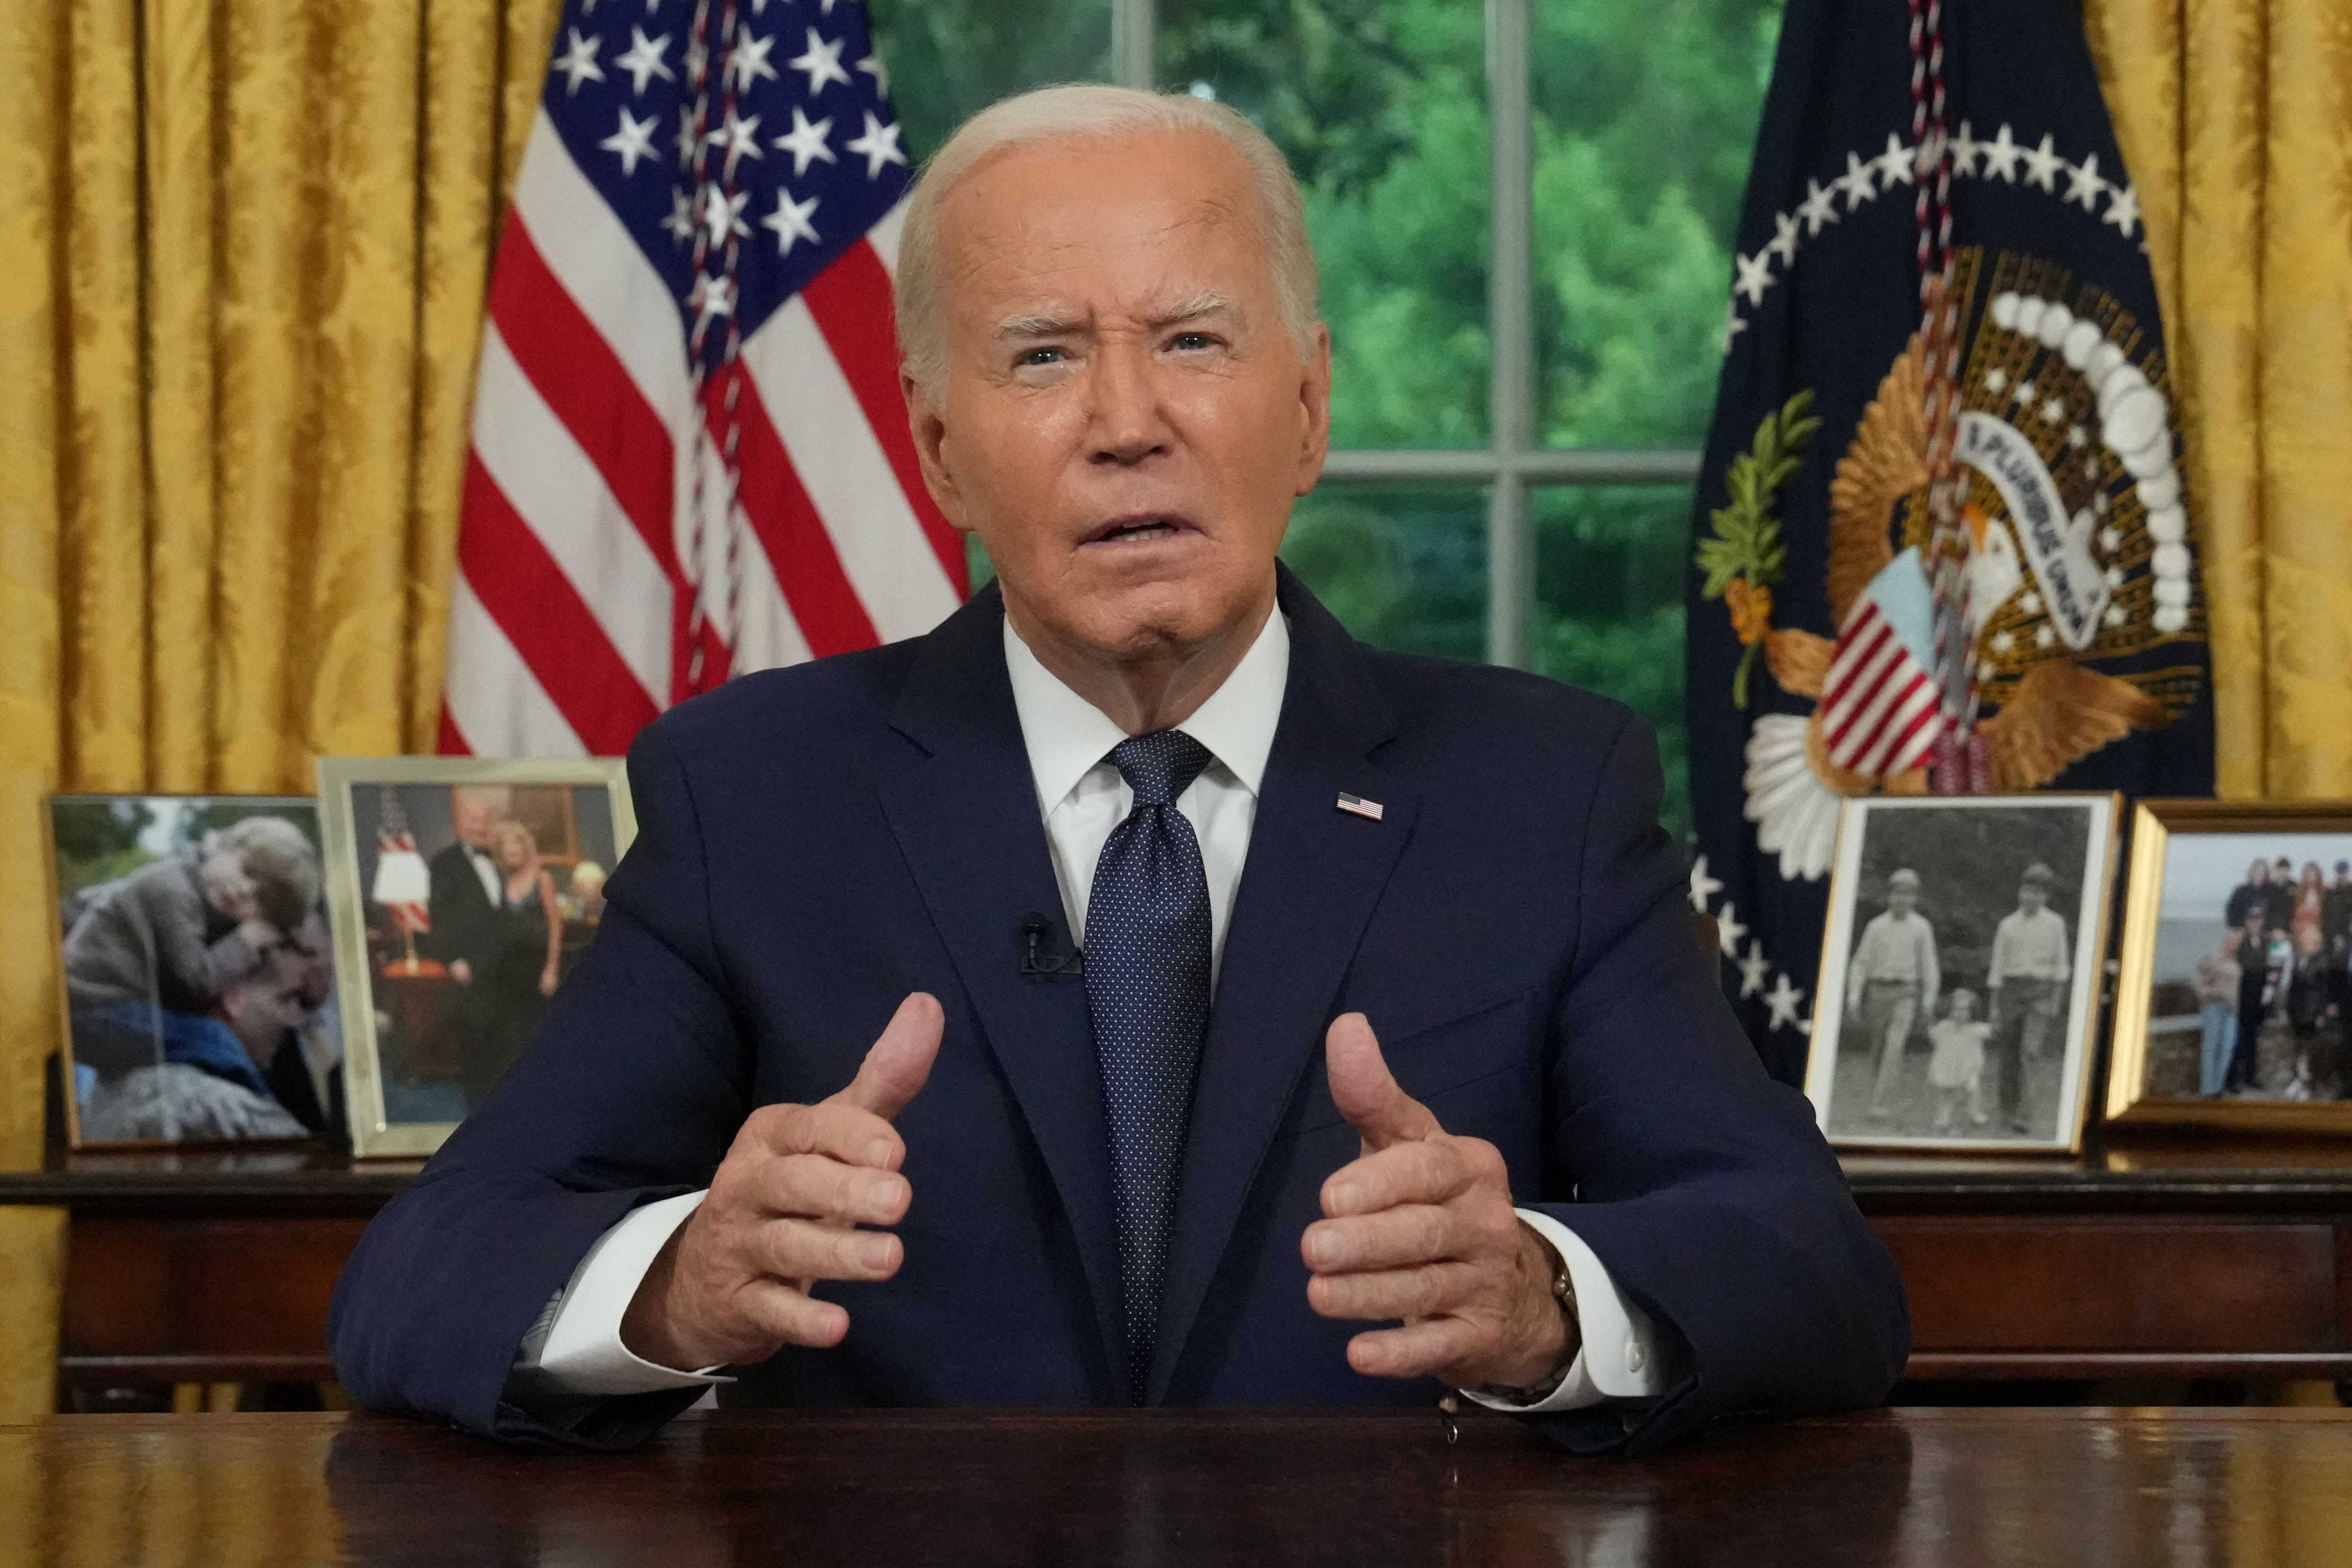 'We must never descend into violence': Biden condemns Trump rally shooting; details on suspect, victims emerge